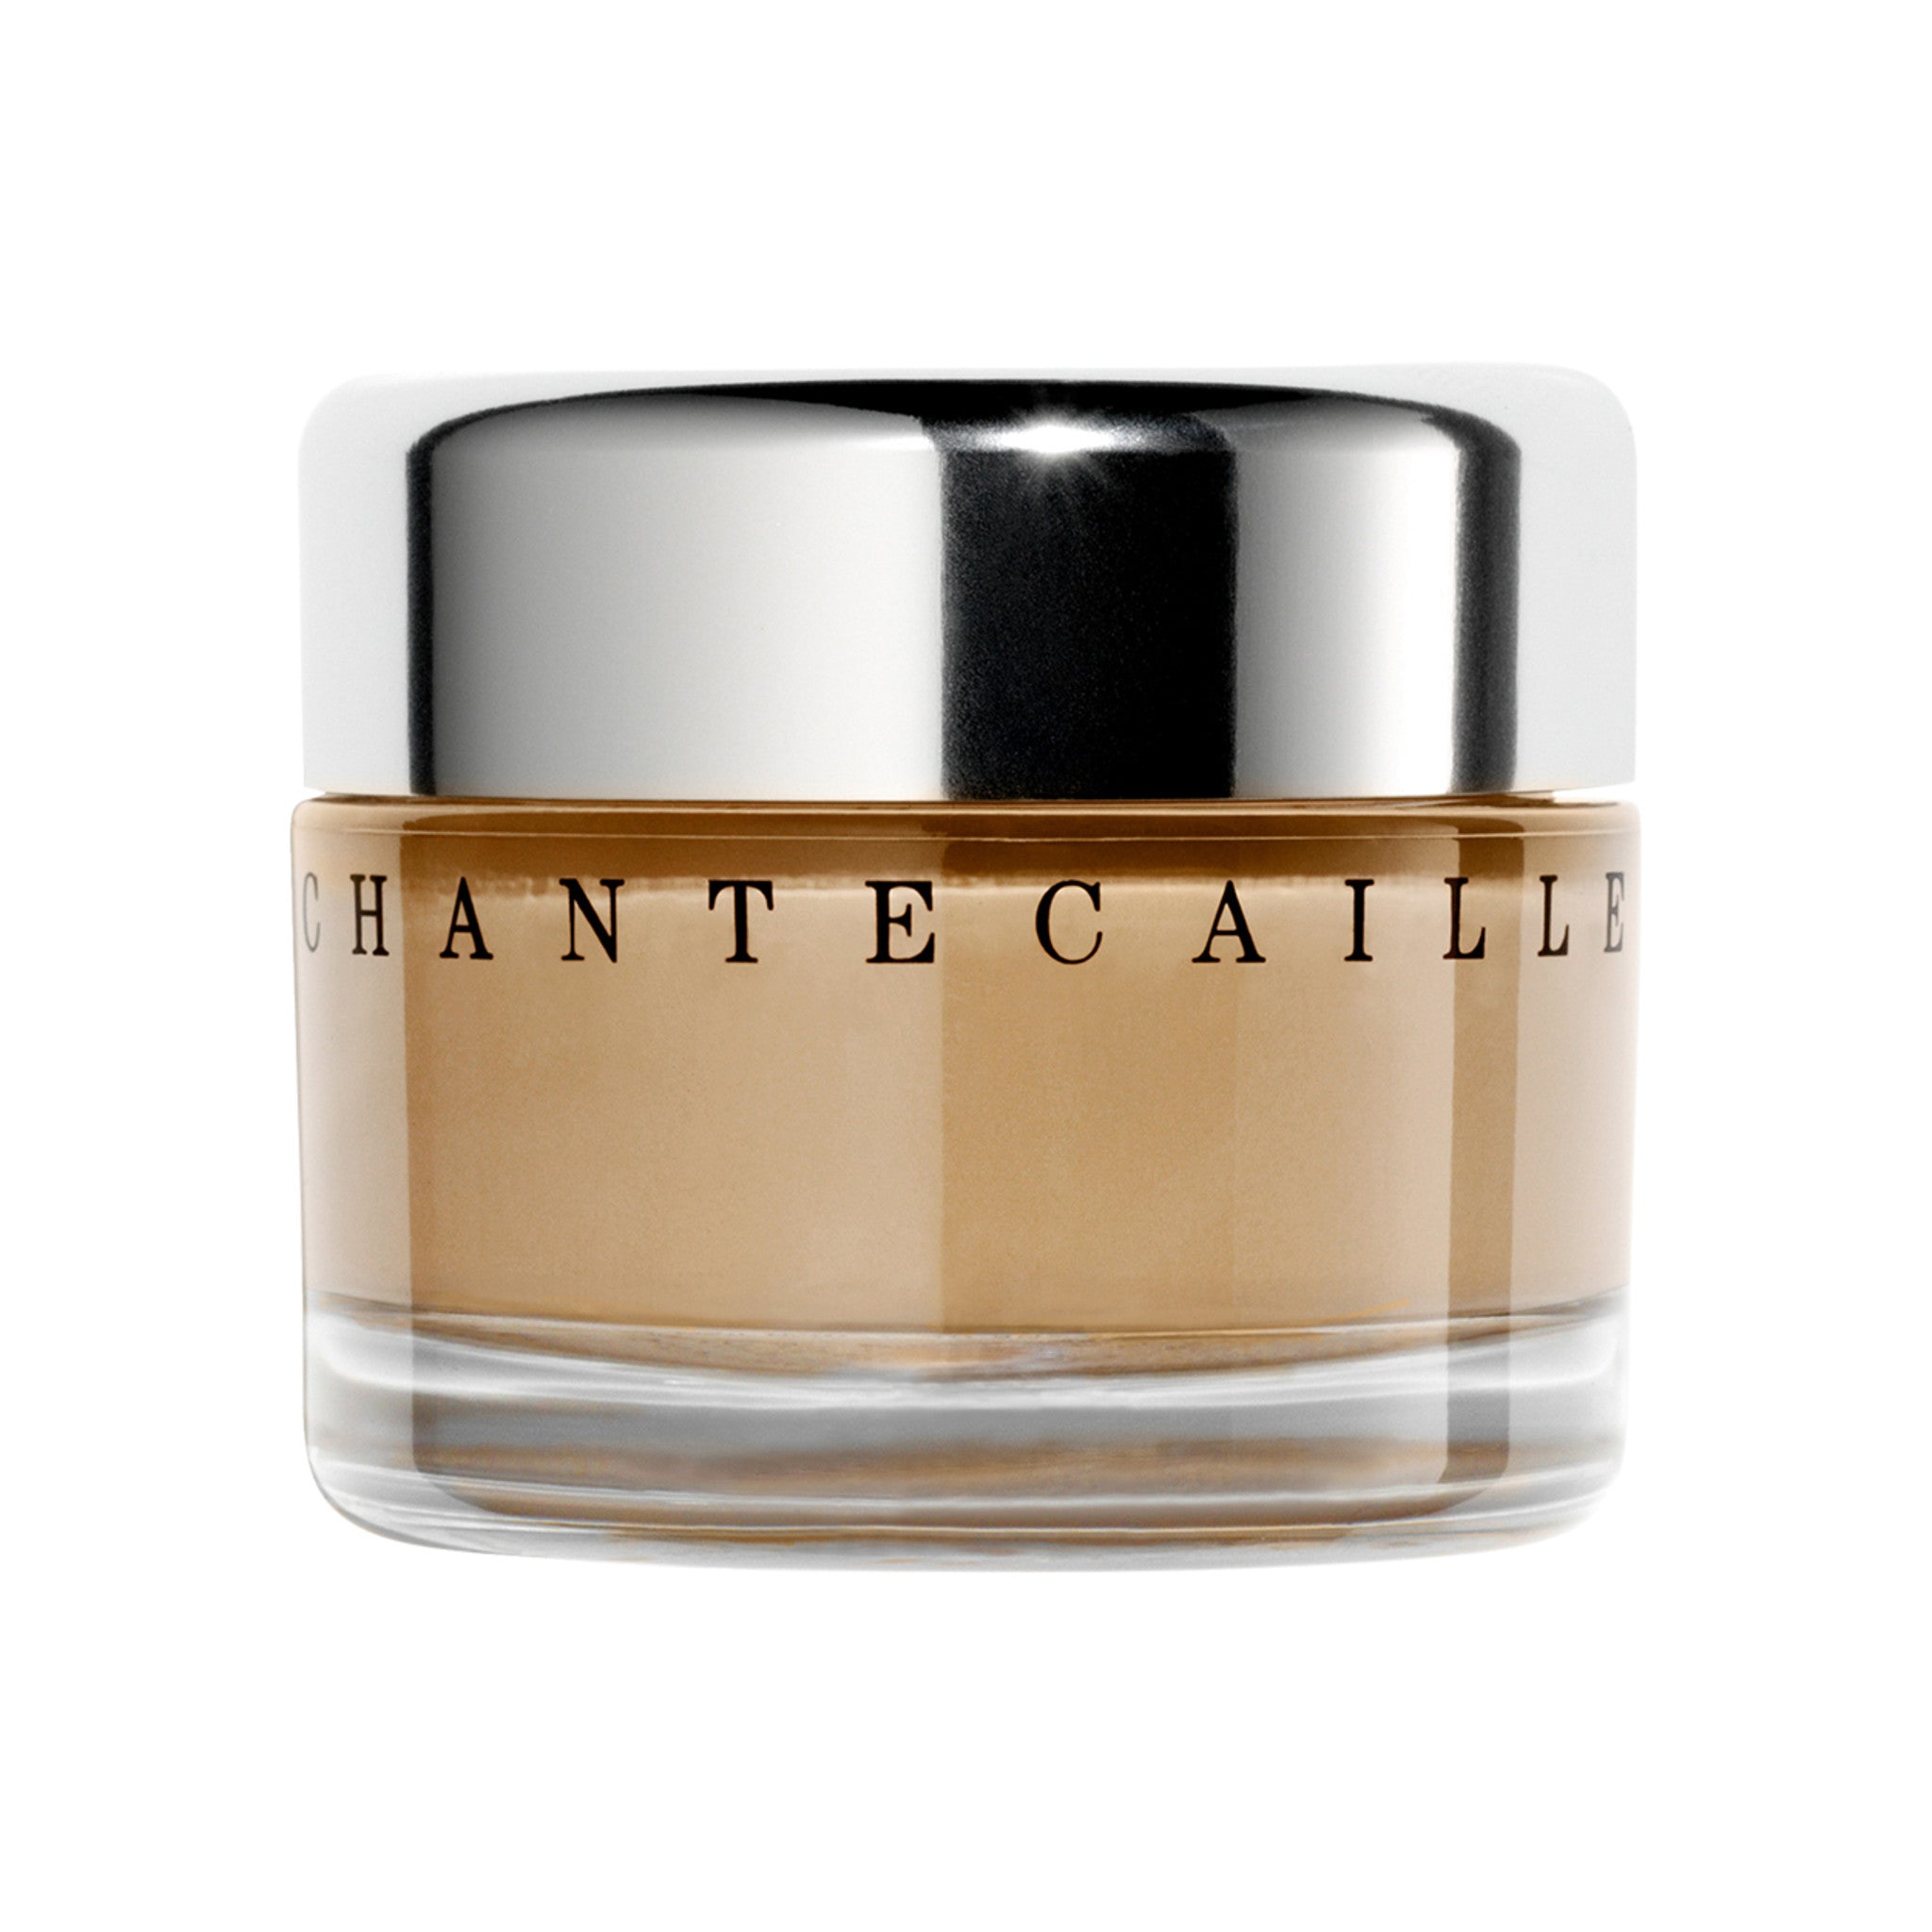 Chantecaille Future Skin Foundation Color/Shade variant: Sand main image. This product is for medium warm neutral golden complexions